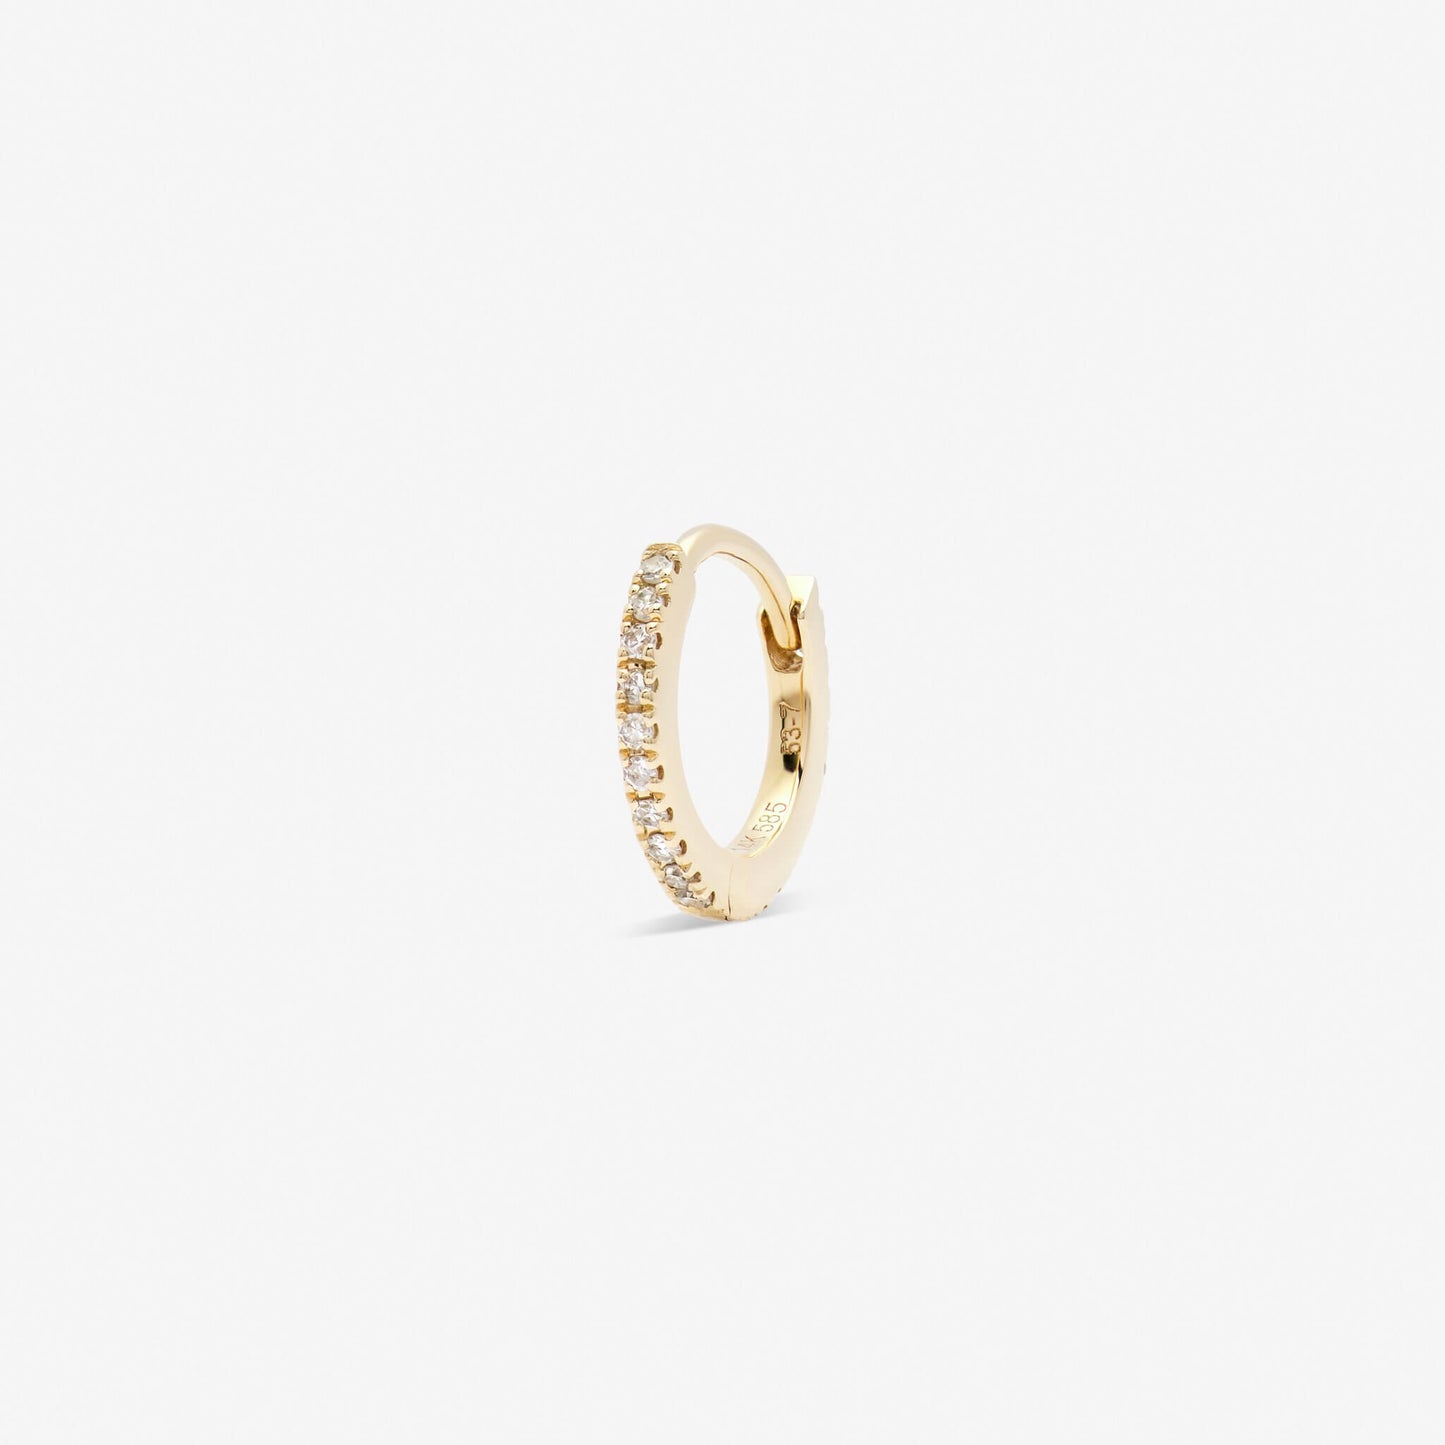 9mm hoop with white diamonds set in yellow gold | ENNUI Atelier